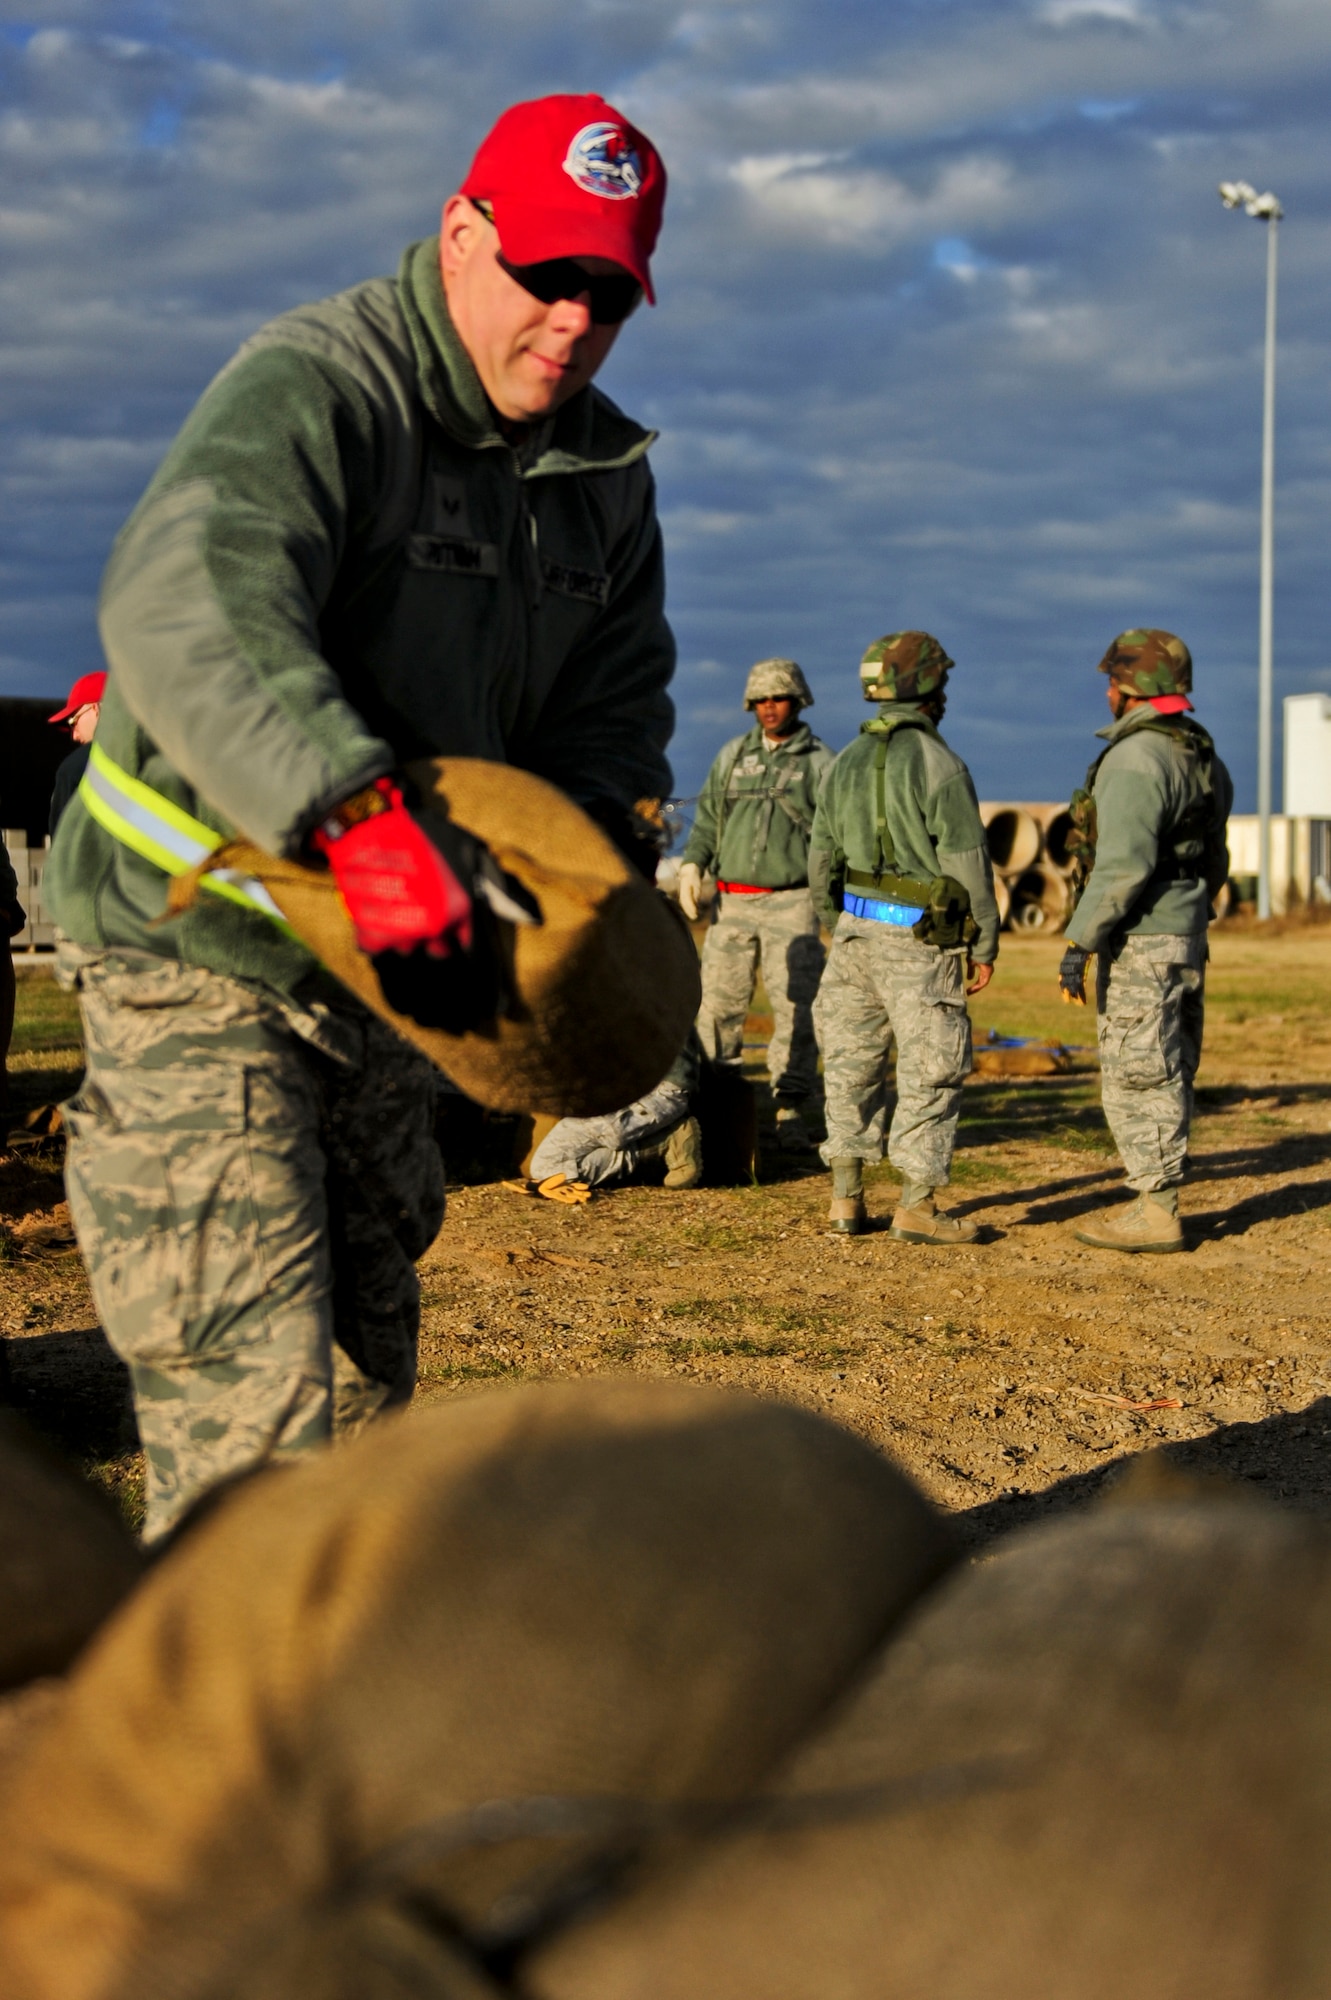 Senior Airman Christopher Putnam builds a defensive fighting position during a field training exercise  Nov. 3, 2014, at Fort Smith, Ark. The weeklong exercise offers 174 participants upgrade training and preparation for an upcoming operation in support of Beyond the Horizon. Beyond the Horizon, conducted annually, is part of U.S. Army South and U.S. Southern Command’s humanitarian and civic assistance program, which works closely with host-nation forces and civilian organizations to provide medical, dental and engineering support. Putnam is with the 567th RED HORSE Squadron out of Seymour Johnson Air Force Base, N.C. (U.S. Air Force photo/Airman 1st Class Brittain Crolley)